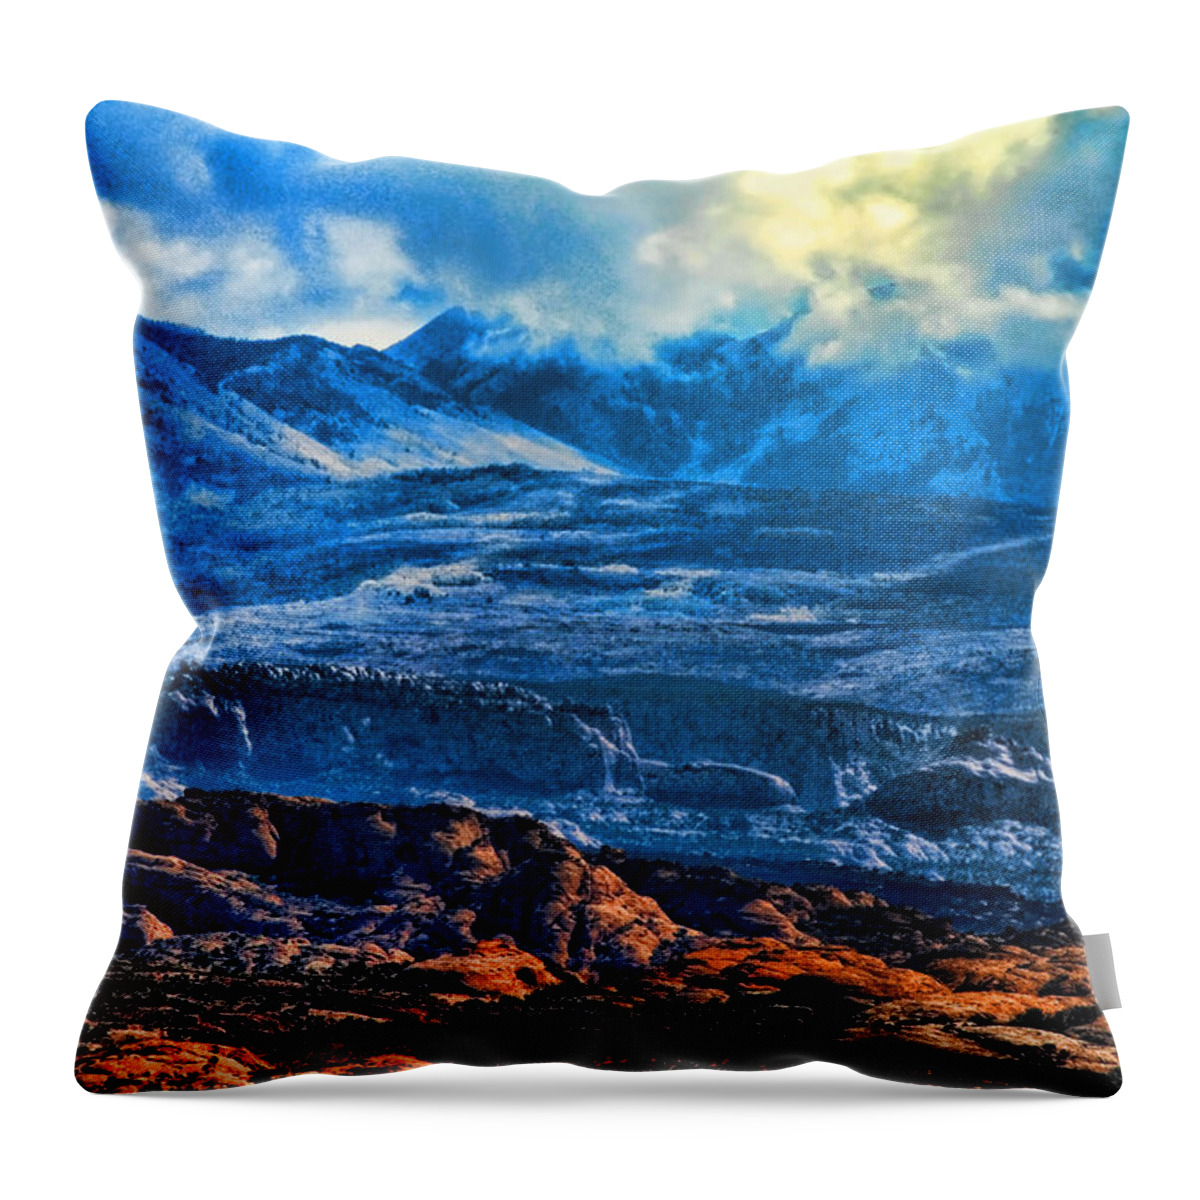 Arches National Park Throw Pillow featuring the photograph La Sal Mountains Arches National Park by Lawrence Christopher